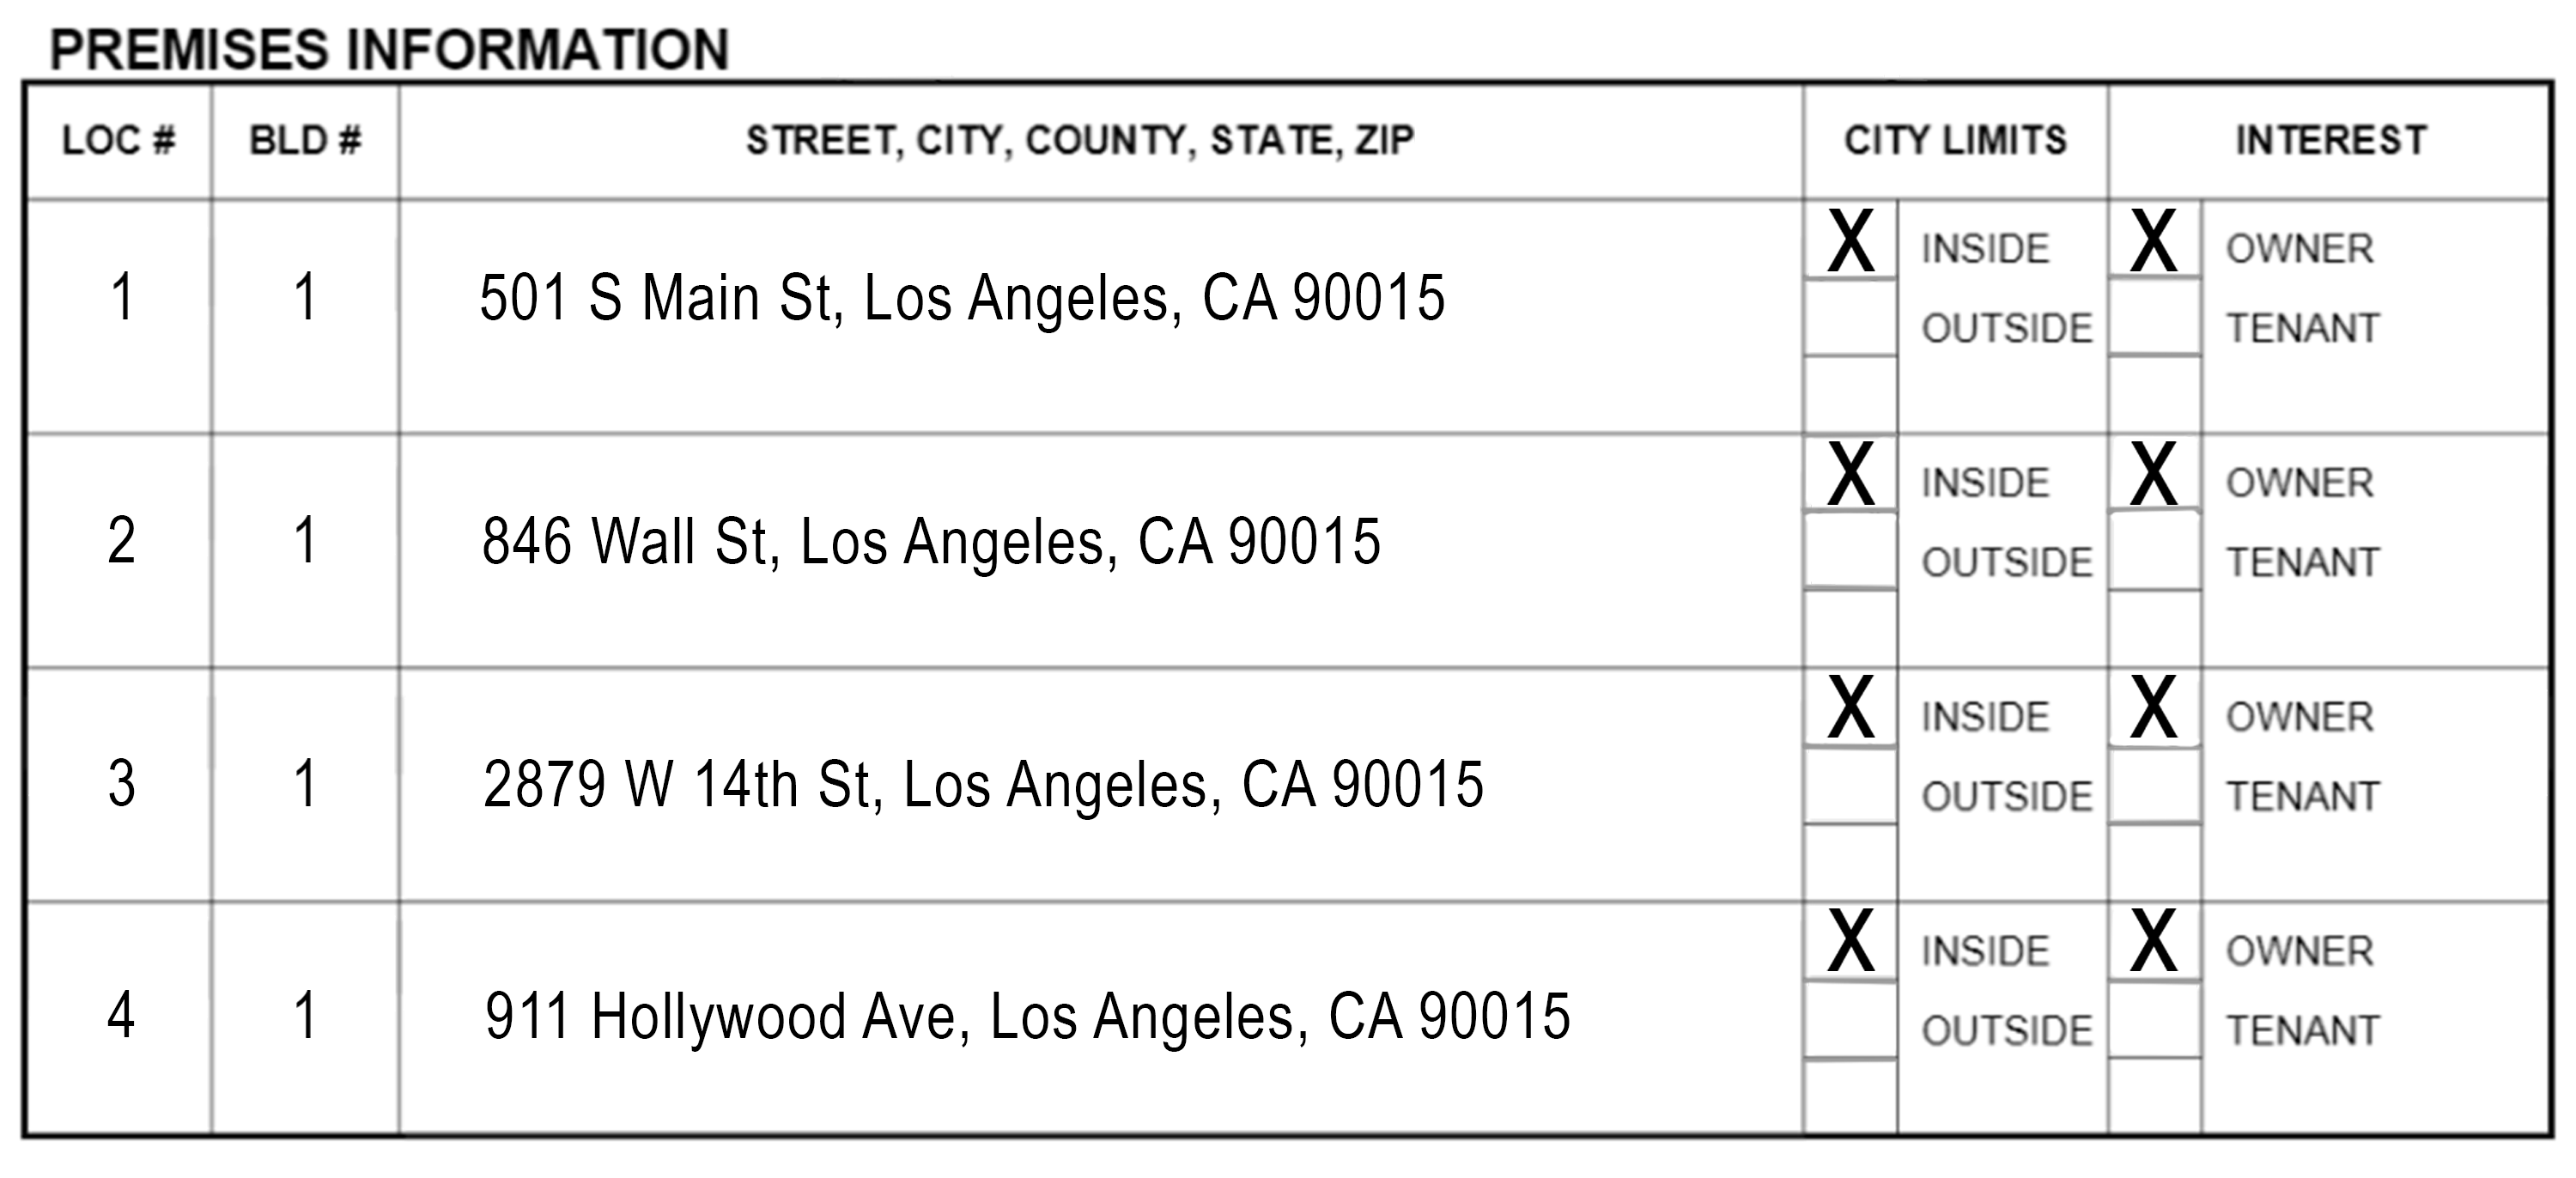 Sample Acord report showing multiple locations in downtown Los Angeles